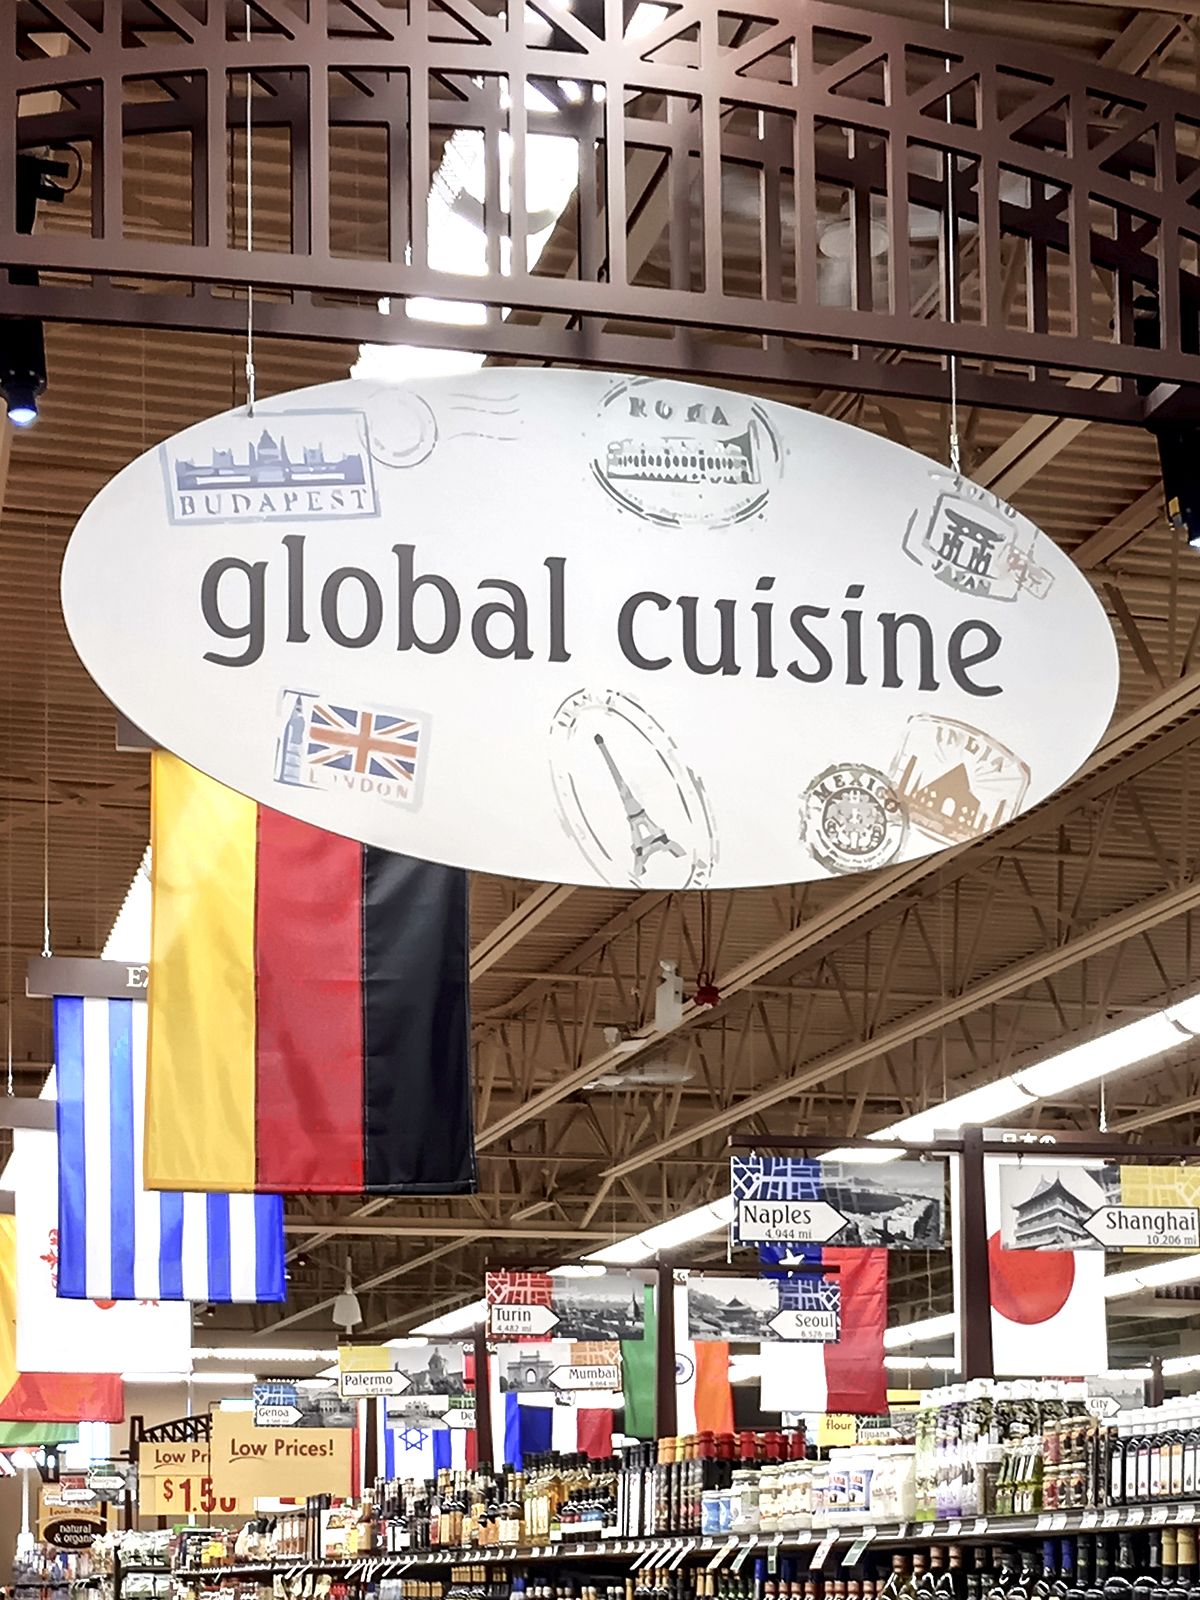 International cuisine in a grocery store